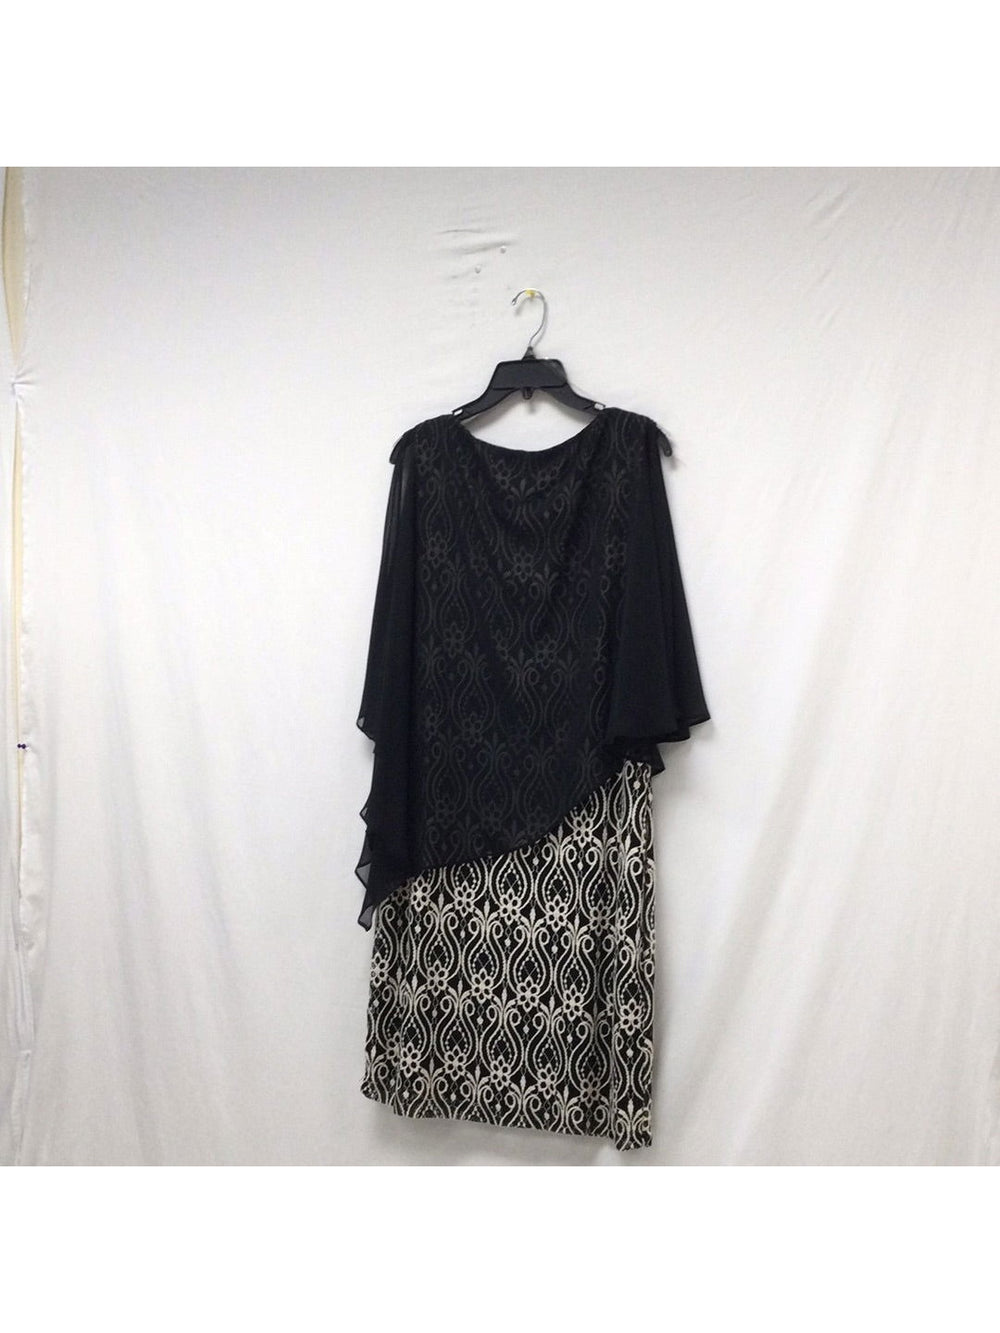 Connected Apparel Ladies Size 12 Black and Cream Lace Dress with Black Cape - The Kennedy Collective Thrift - 